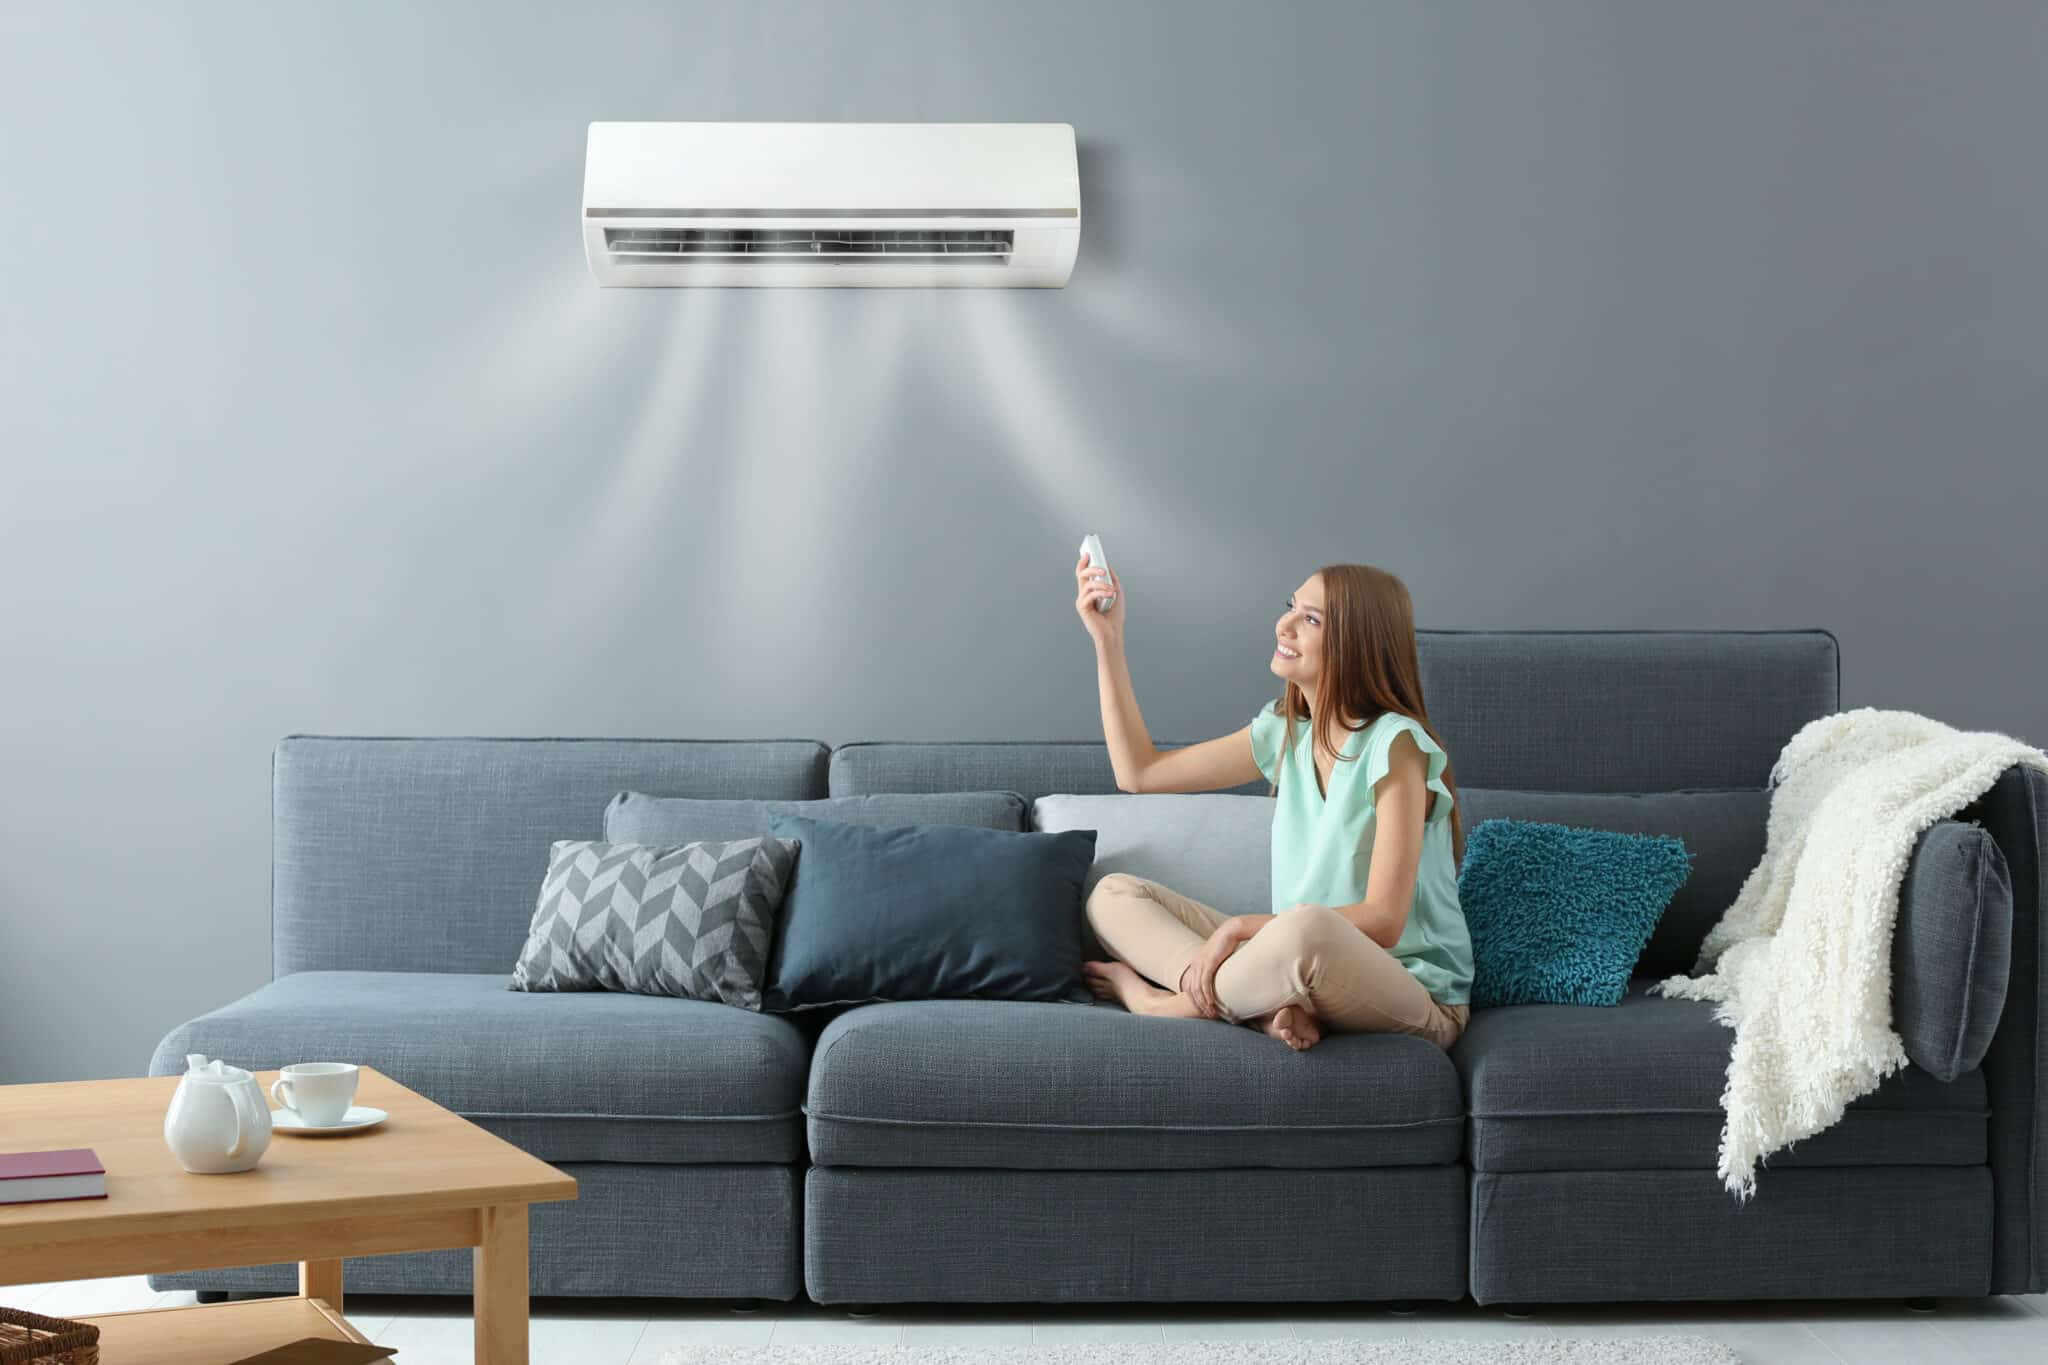 Accurate Electric Plumbing Heating & Air Helps Beat the Heat This Summer with Proper AC Maintenance